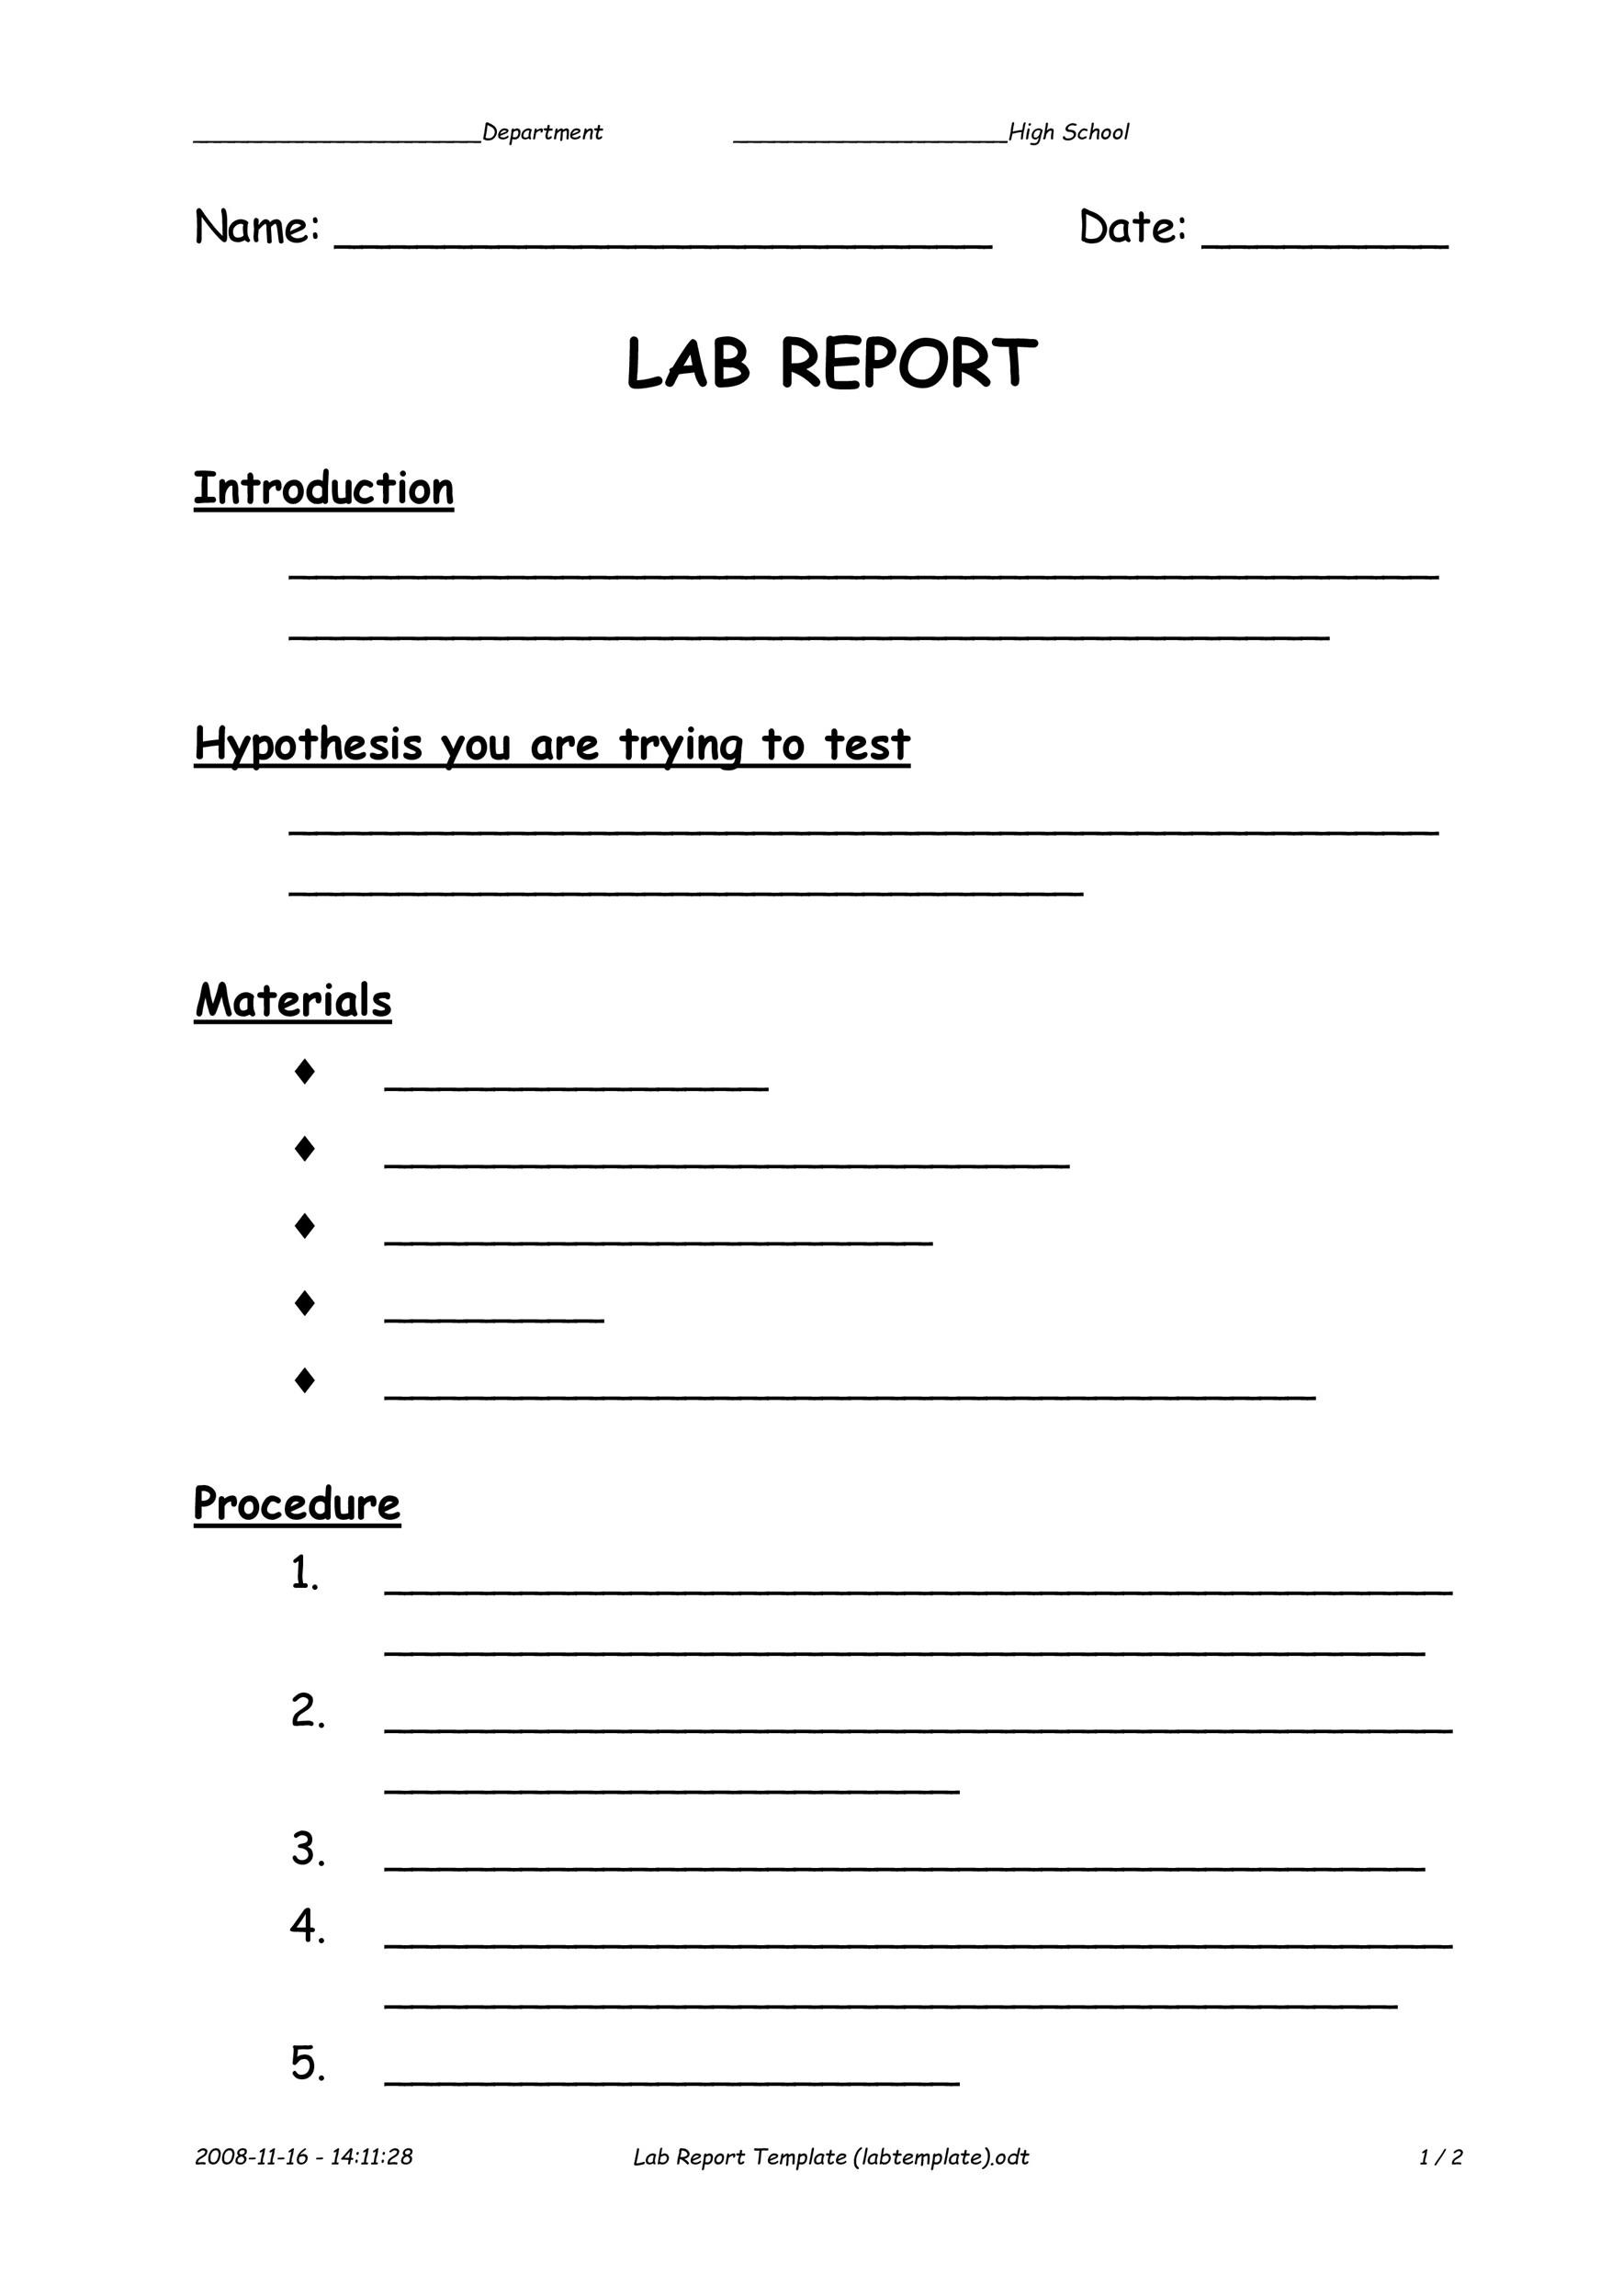 Lab Report Format Example